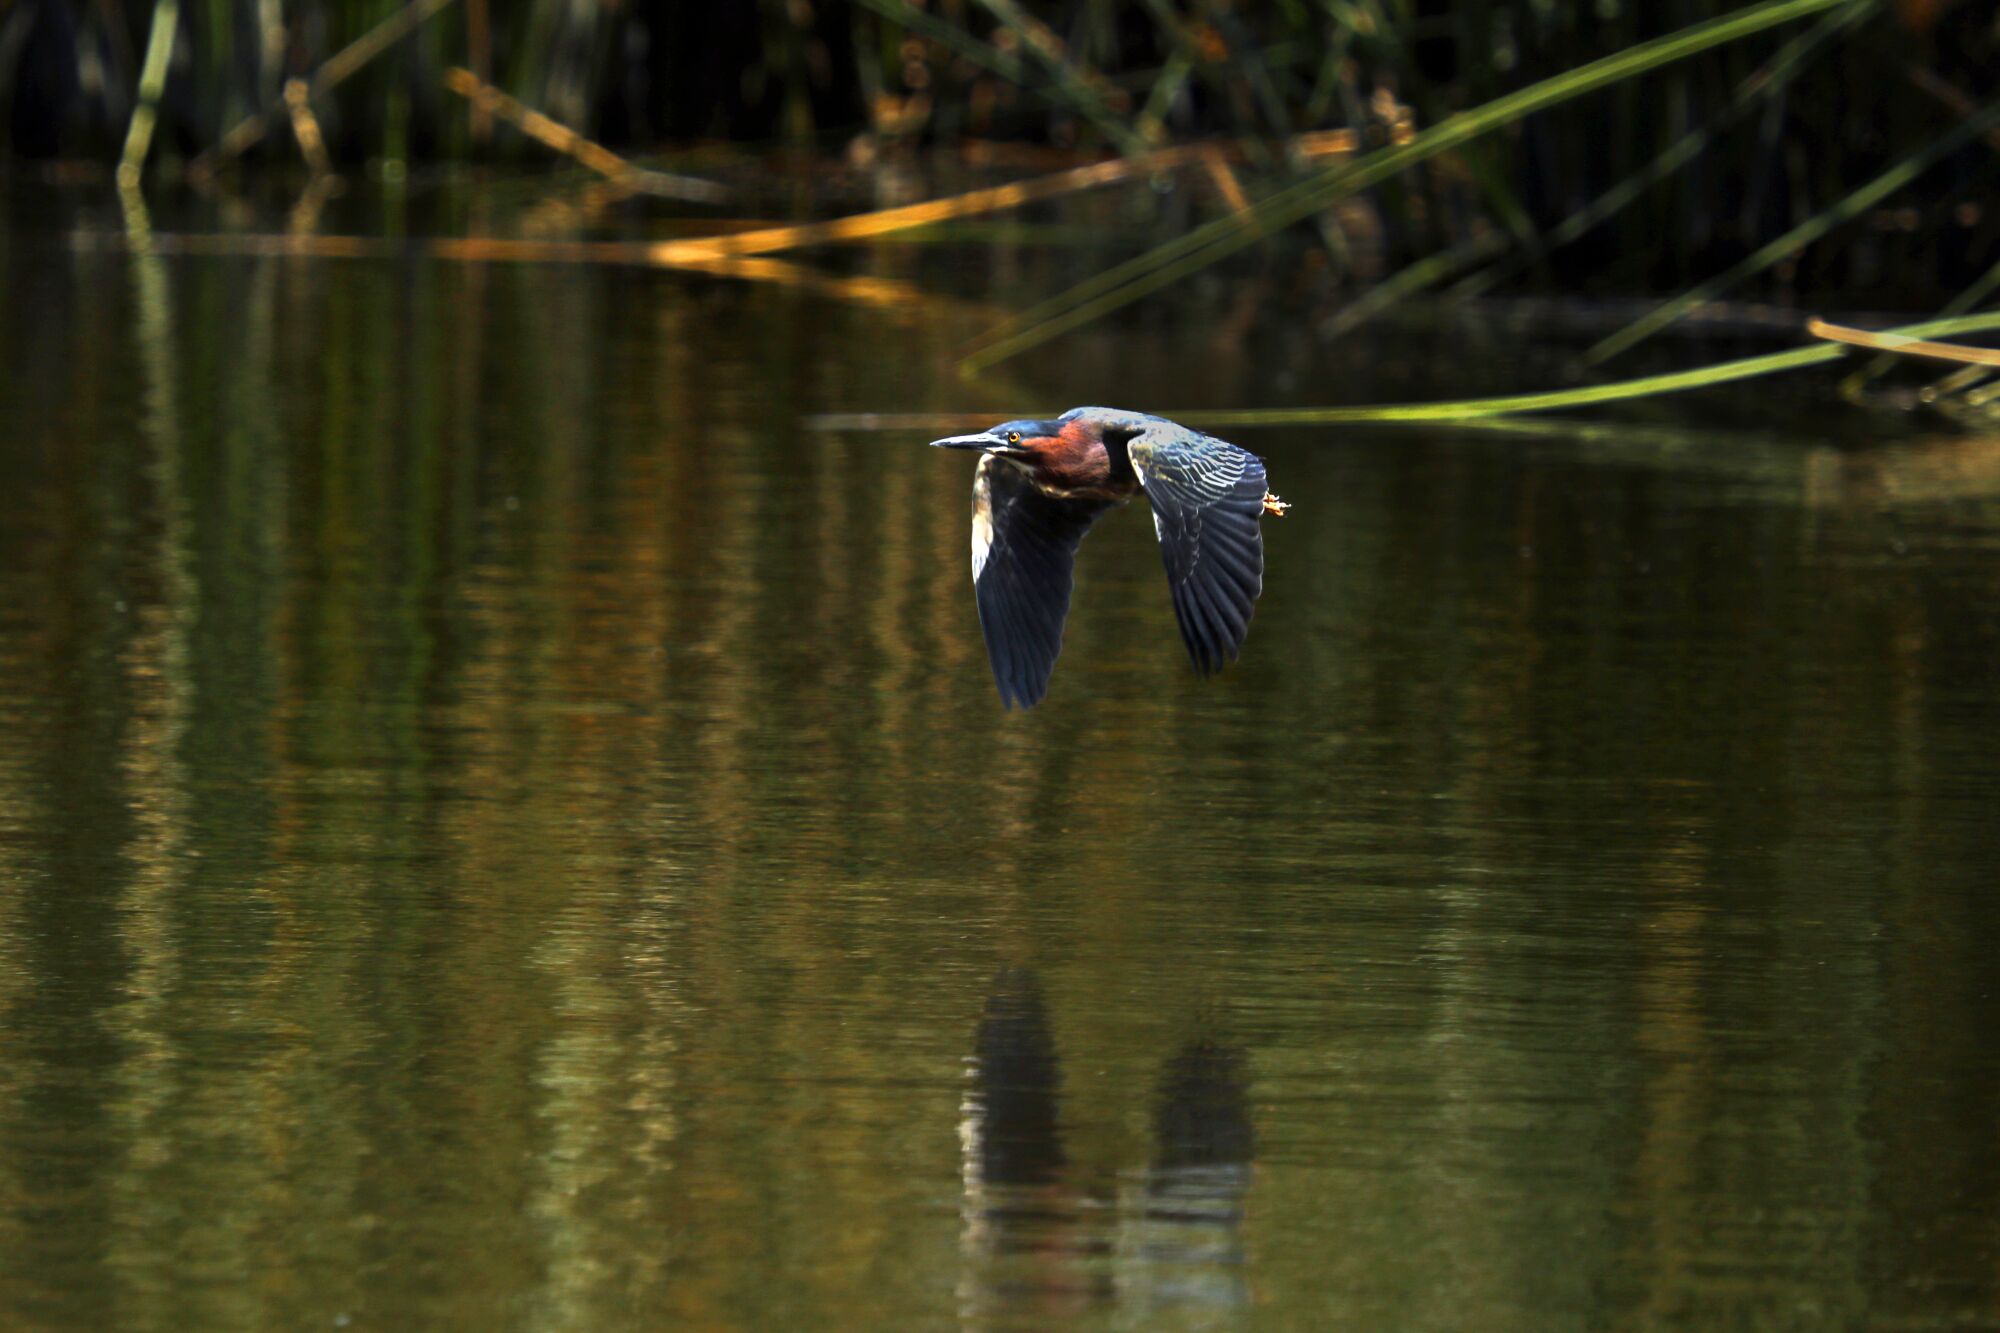 A heron flies over water, just above the surface